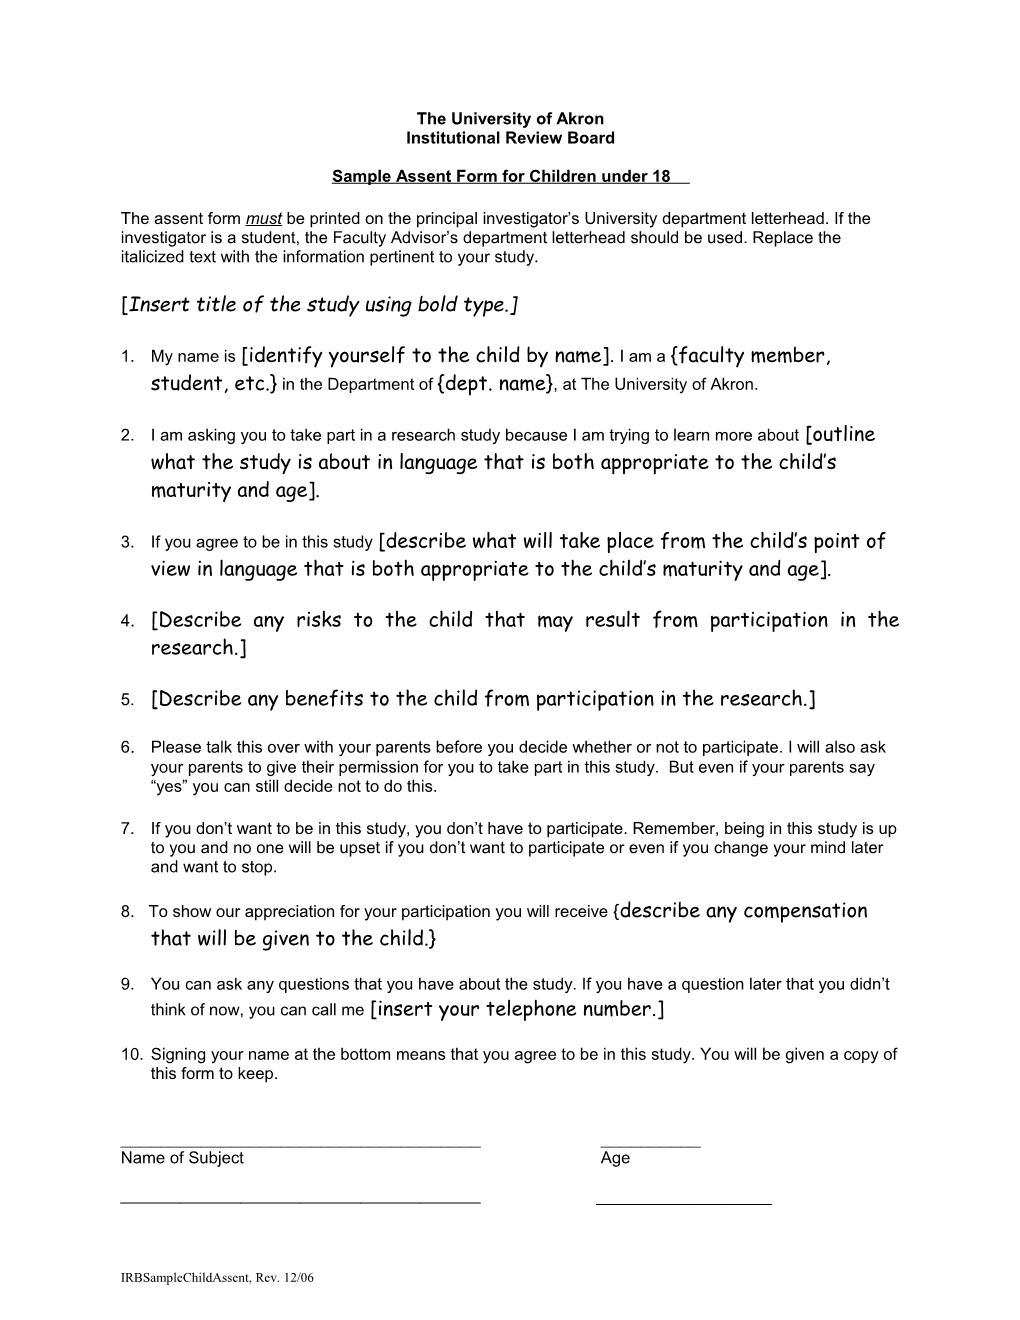 Sample Parental Consent Form for Subjects Under 18